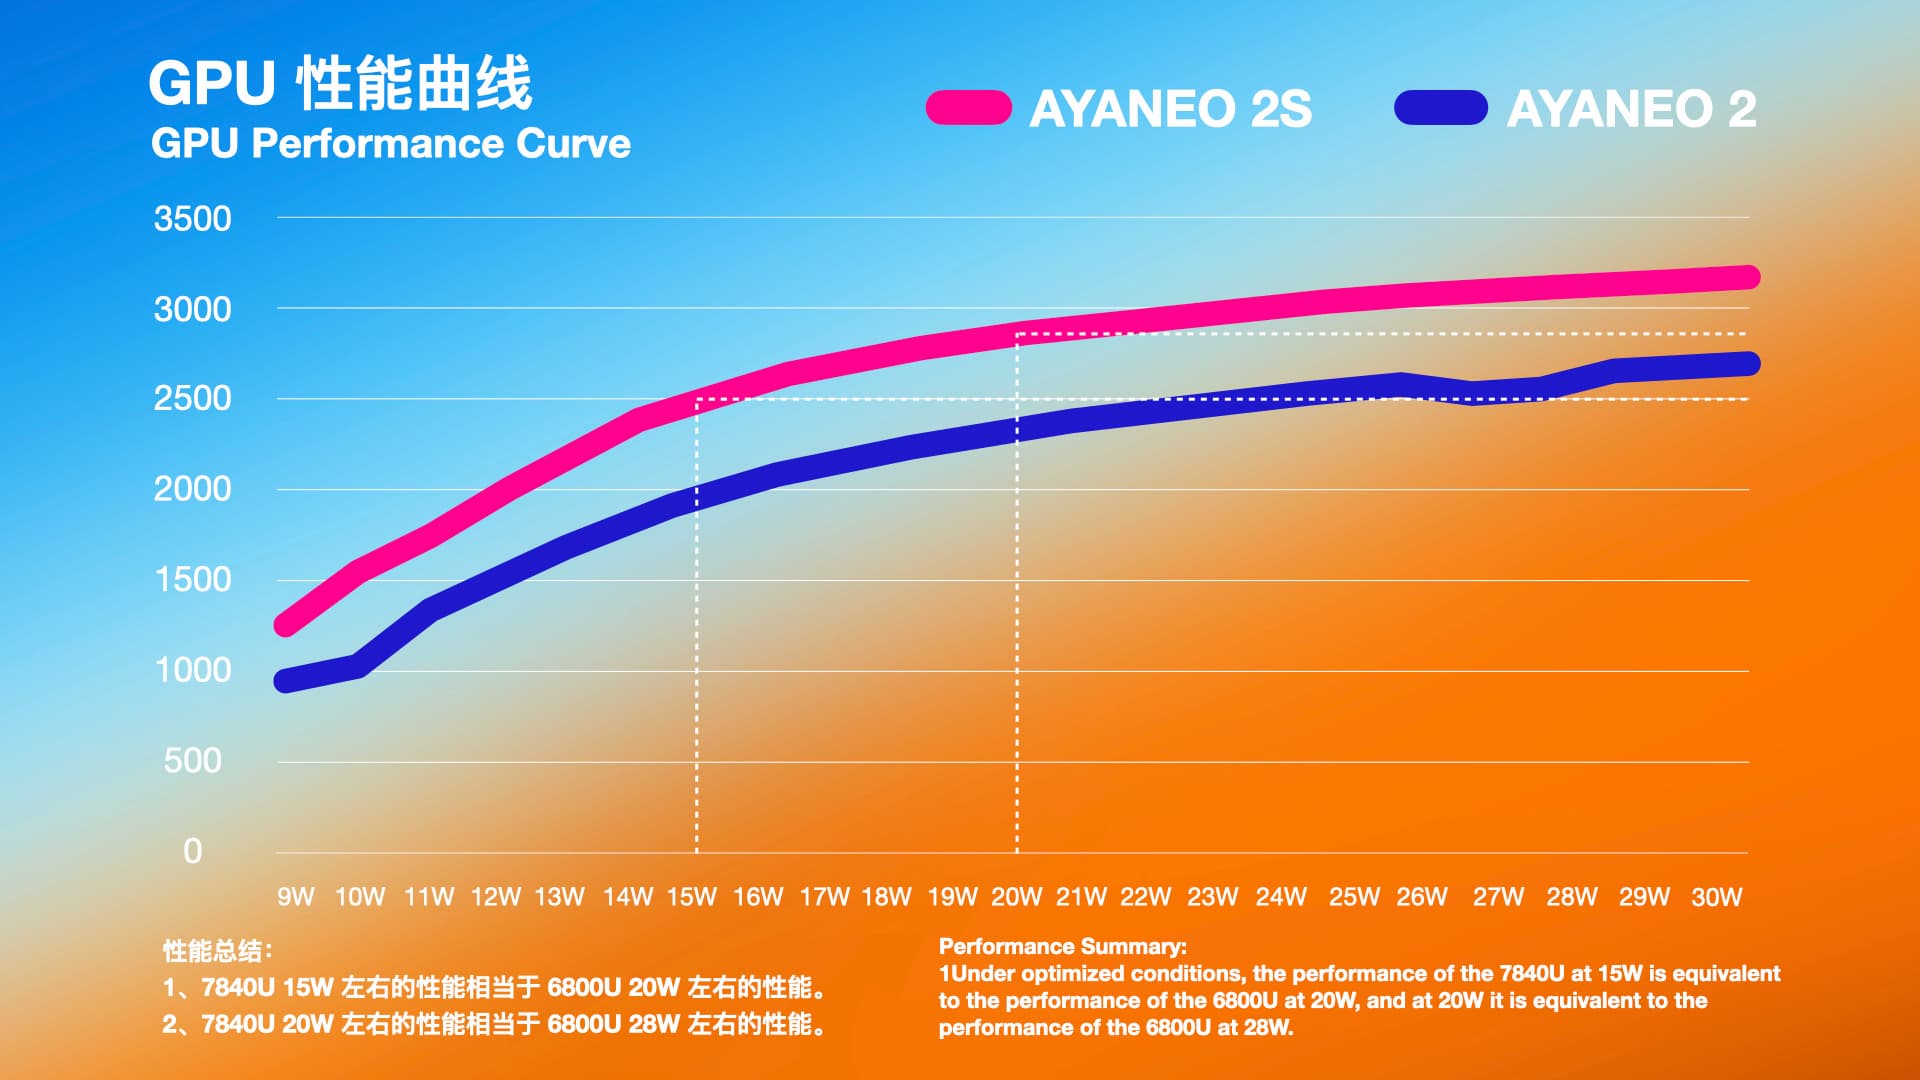 In benchmarks shared by Ayaneo, the 2s clearly outperforms the Ayaneo 2.